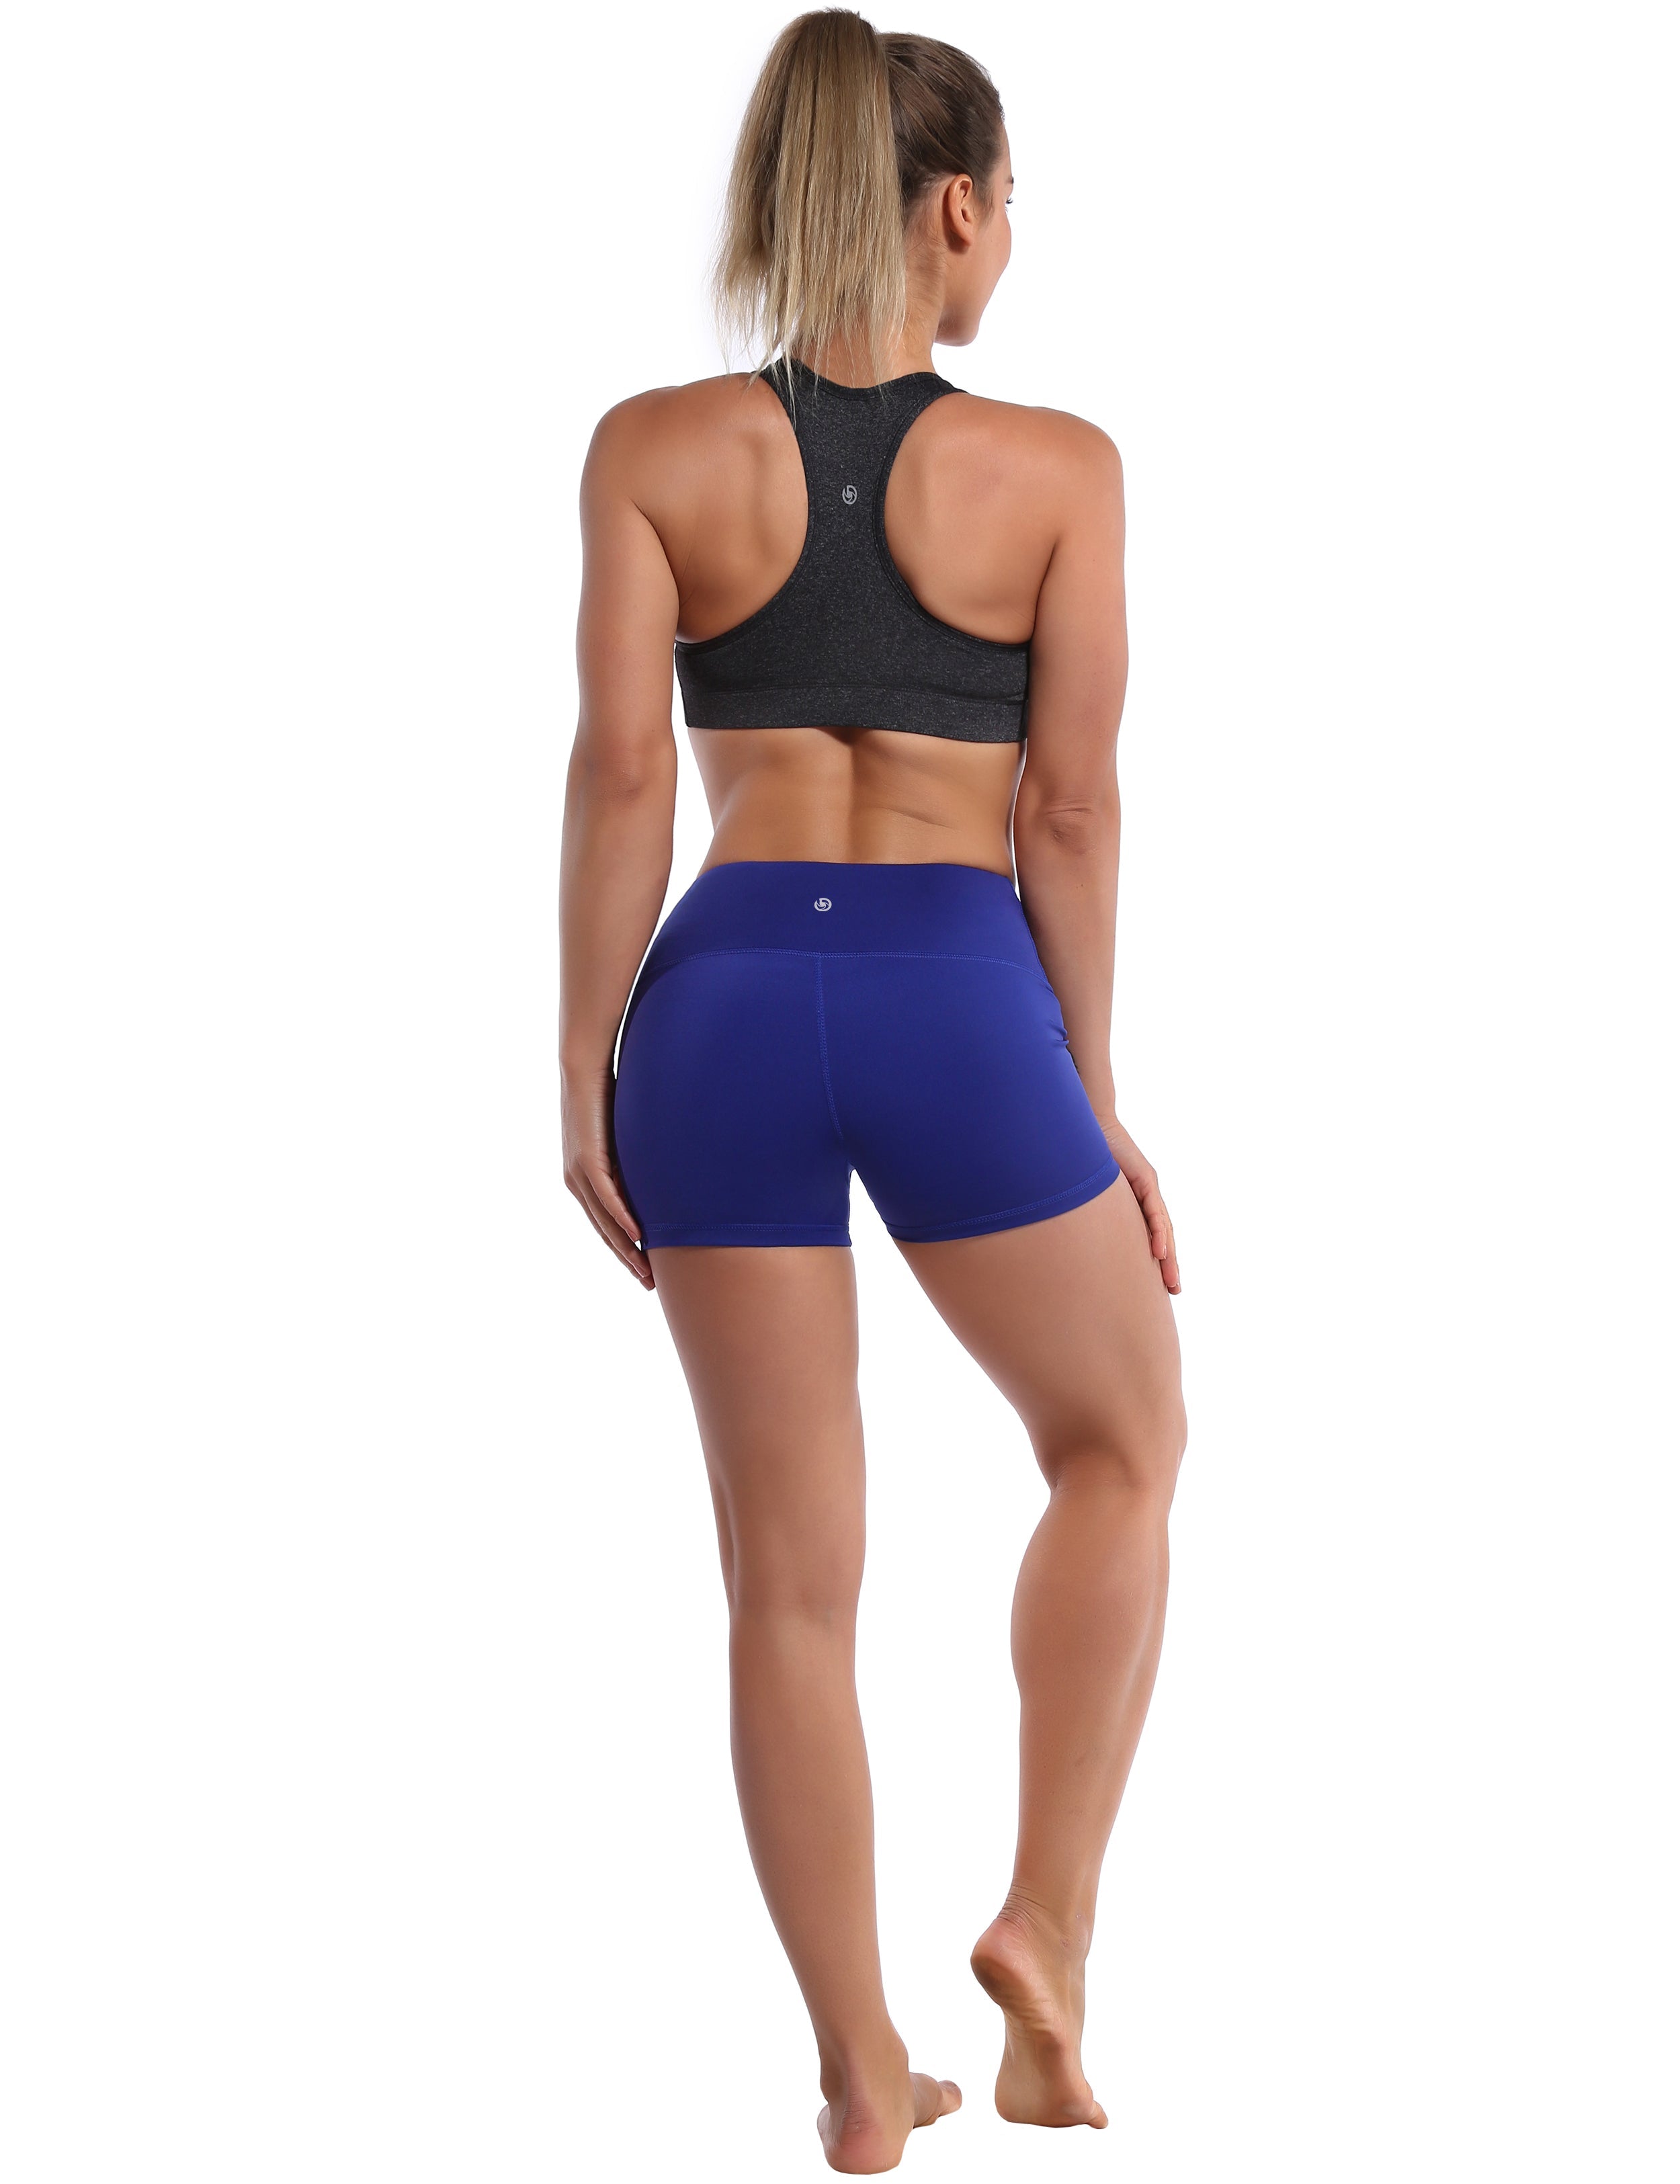 2.5" Biking Shorts navy Softest-ever fabric High elasticity High density 4-way stretch Fabric doesn't attract lint easily No see-through Moisture-wicking Machine wash 75% Nylon, 25% Spandex